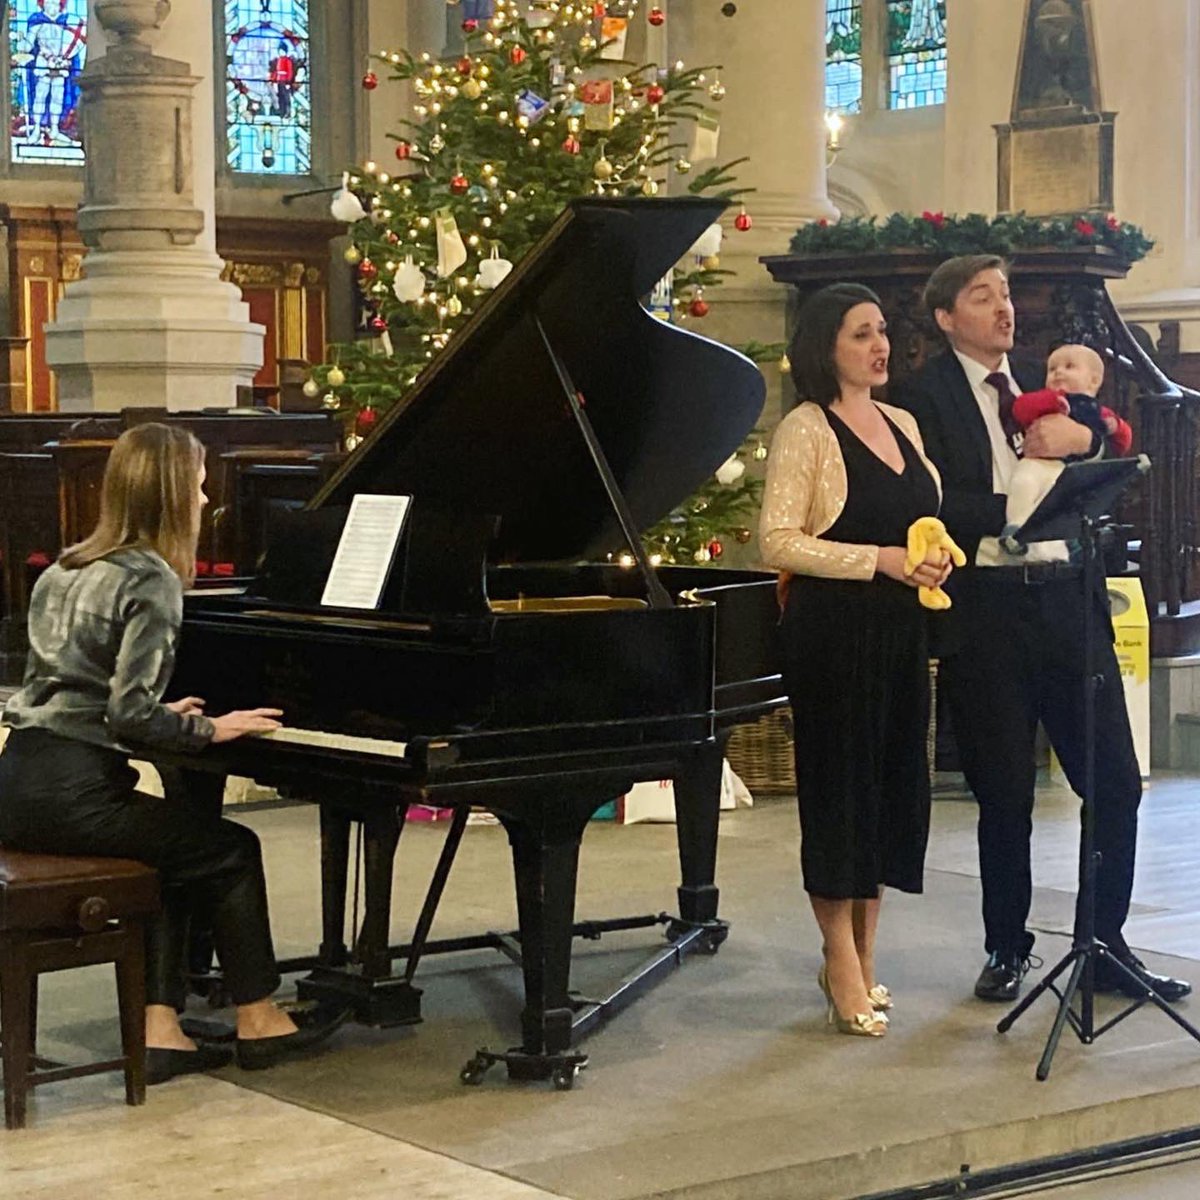 Today’s festive 🎄event at @HolySepulchreUK. Professional music-making in a #relaxed #dementiafriendly #familyfriendly atmosphere with seasonal singalongs & a social tea. Such a special afternoon! Thanks to all involved, including baby Lyra who was a star & brought so much joy 💖